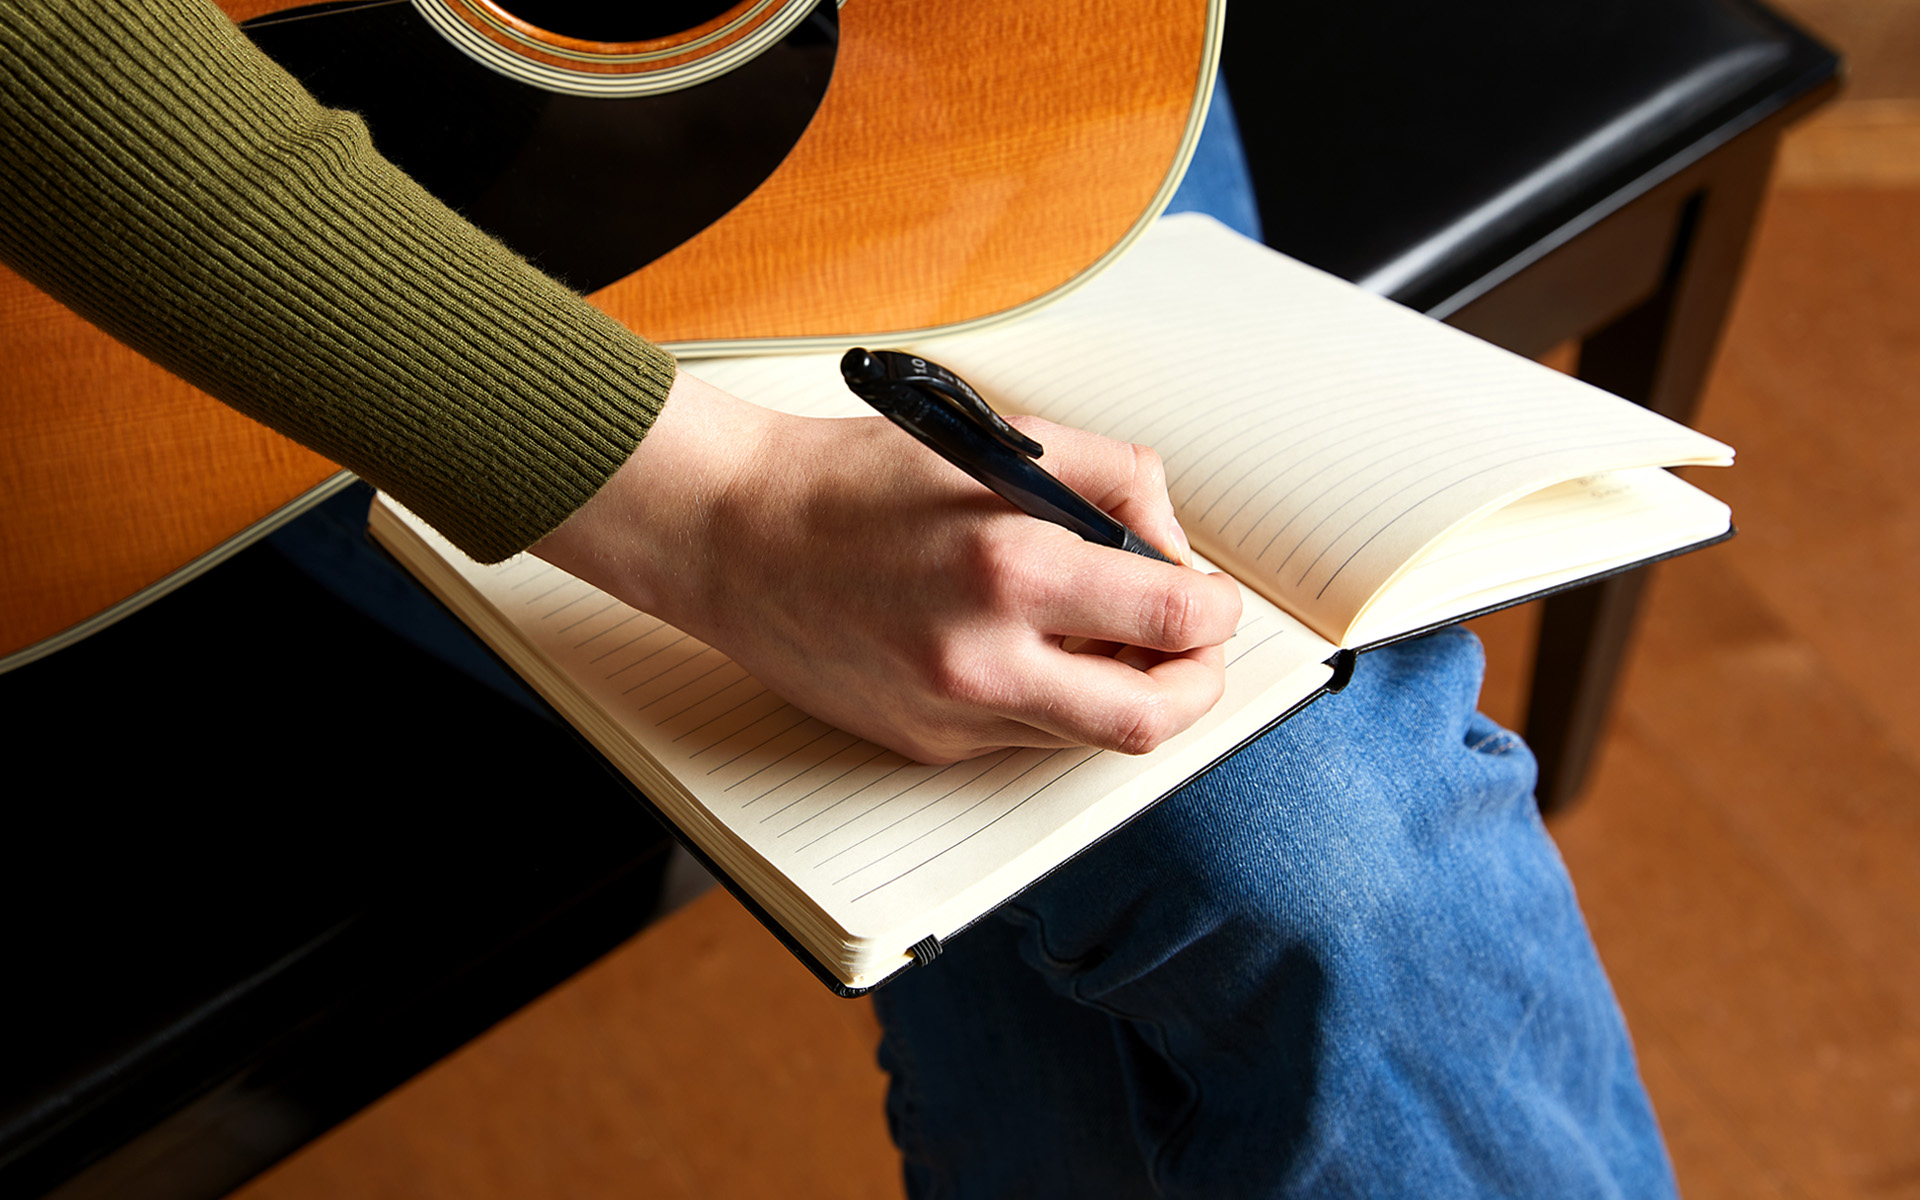 Person's hand writing in a notebook. Guitar on lap in background.